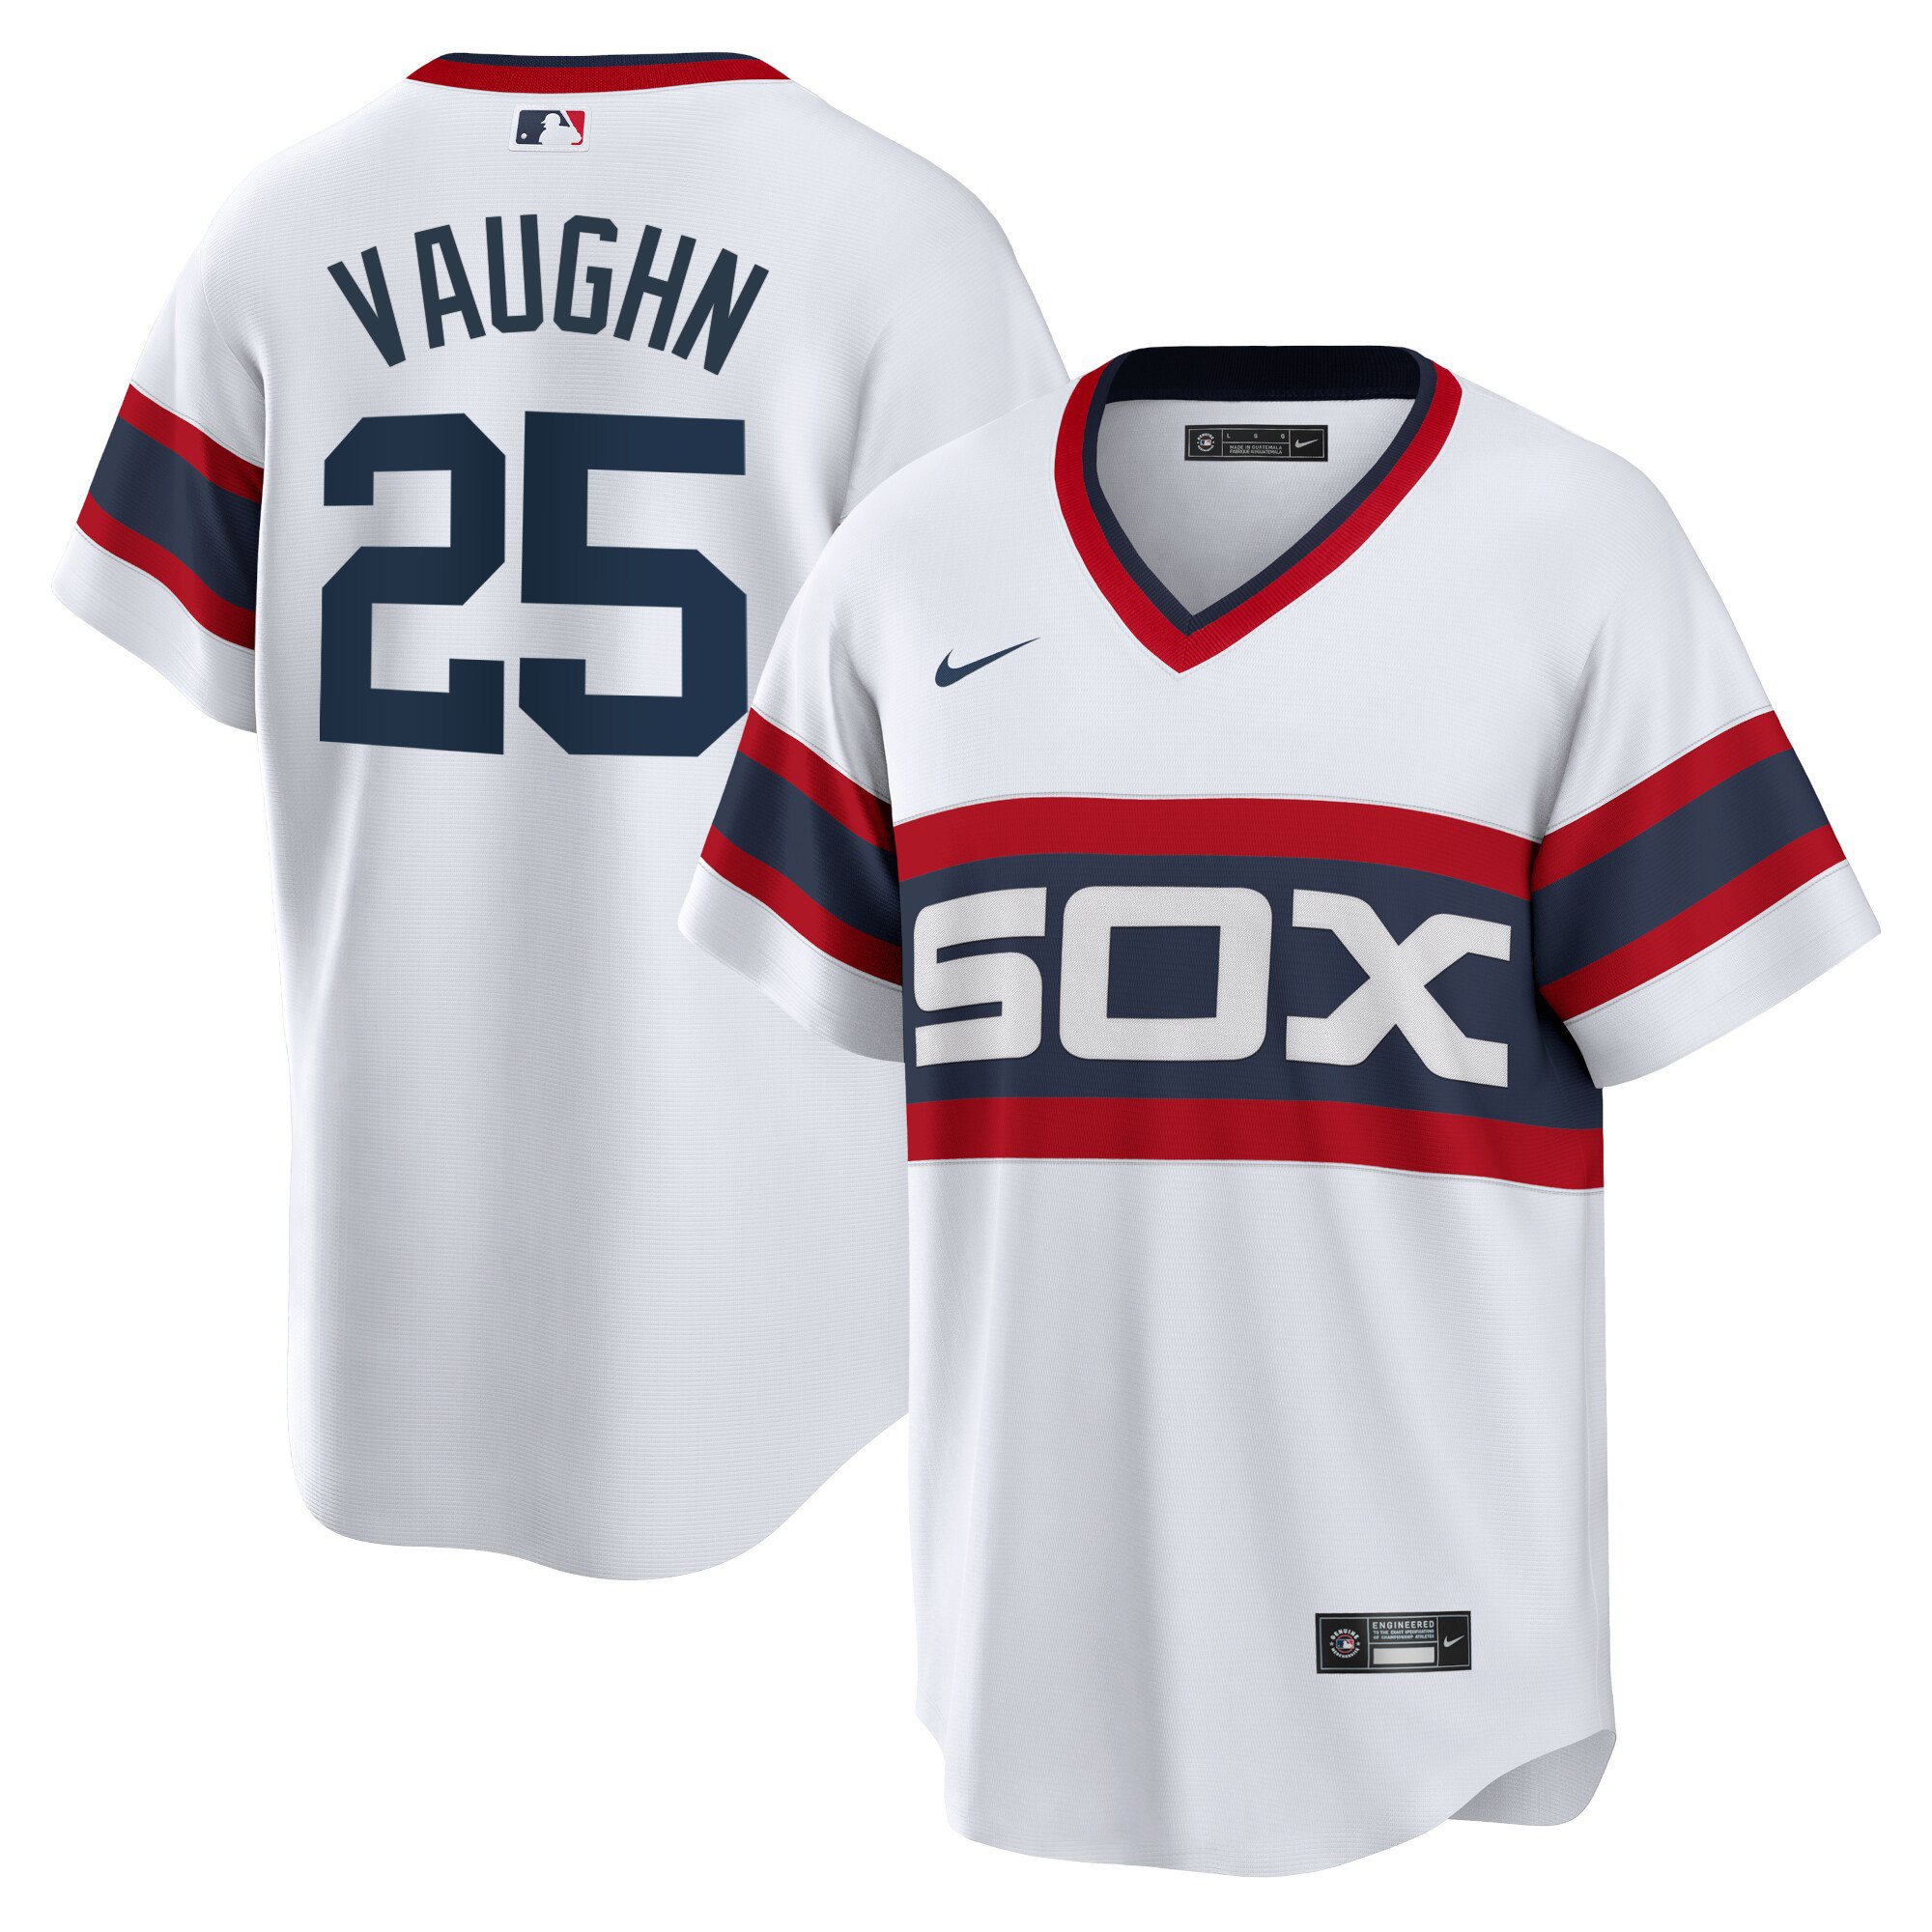 buy Nike White 2021 Field of Dreams Game MLB Jersey MenChicago White Sox  Minor League Update: May 28 - Cheap Chicago White Sox Men Jerseys